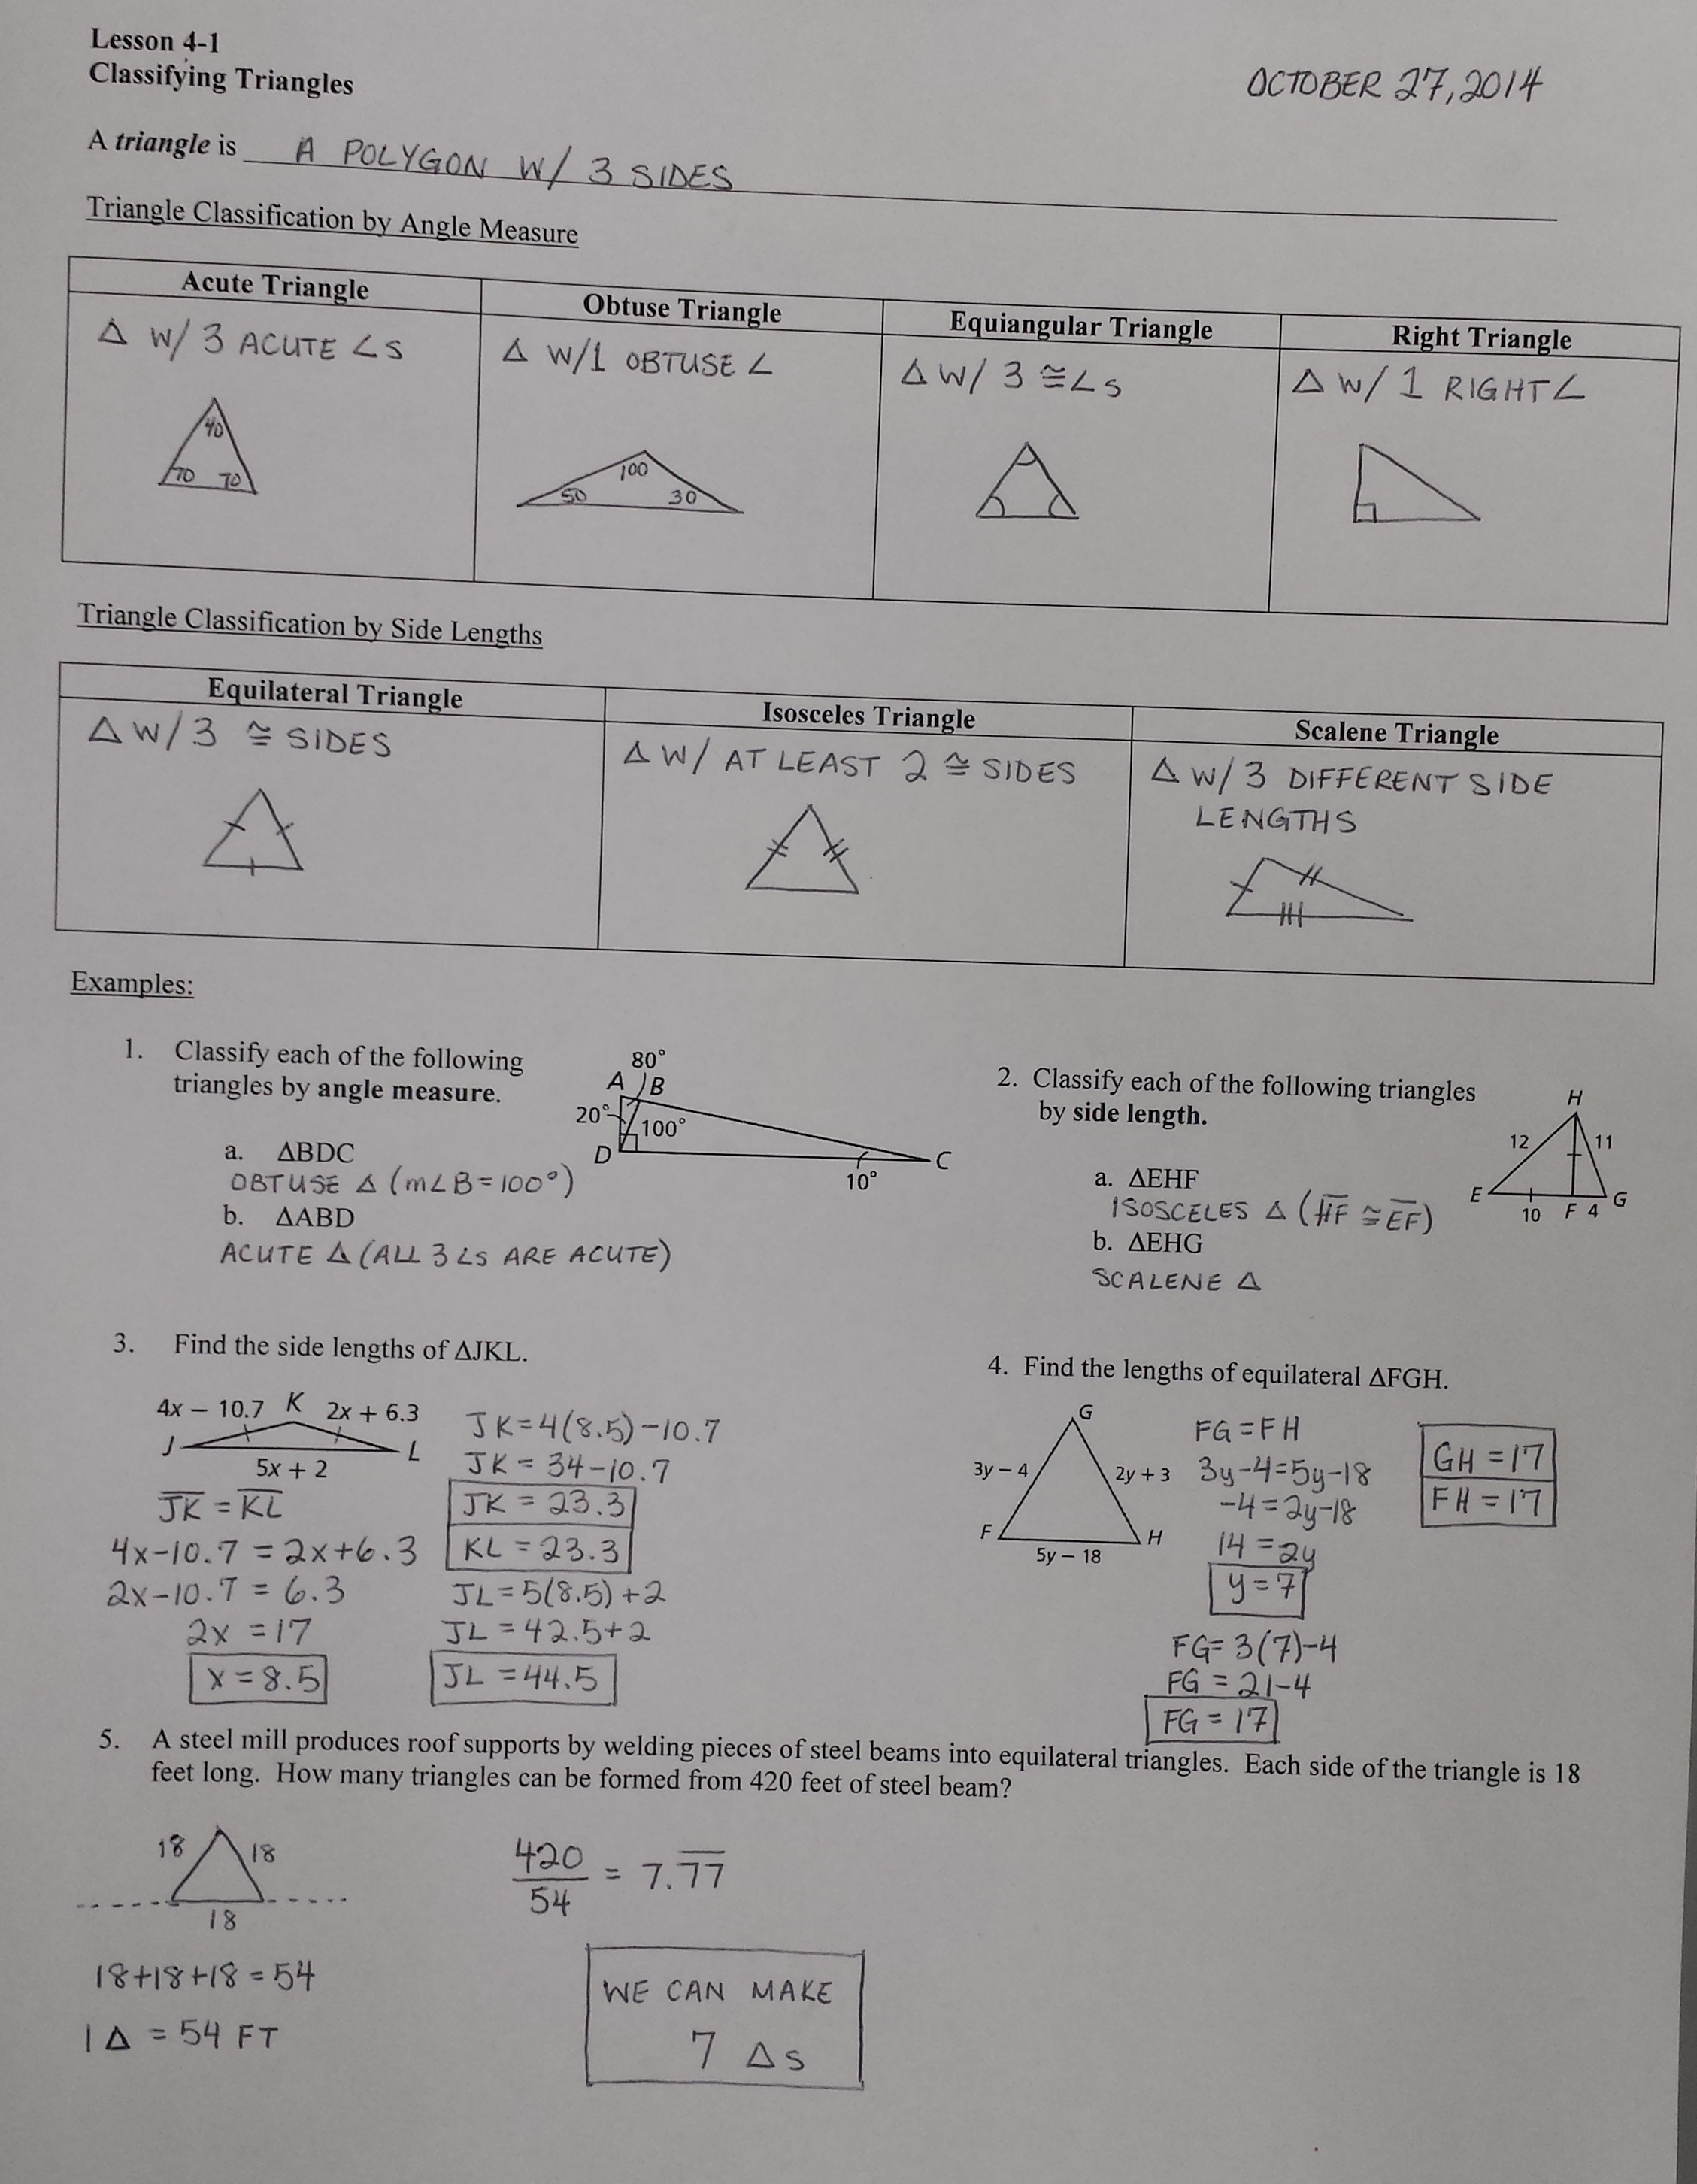 Unit 4 Congruent Triangles Homework 5 Answers - Unit 4 Congruent Triangles Homework 5 Answers : Congruent ... - Unit 4 practice test draft.